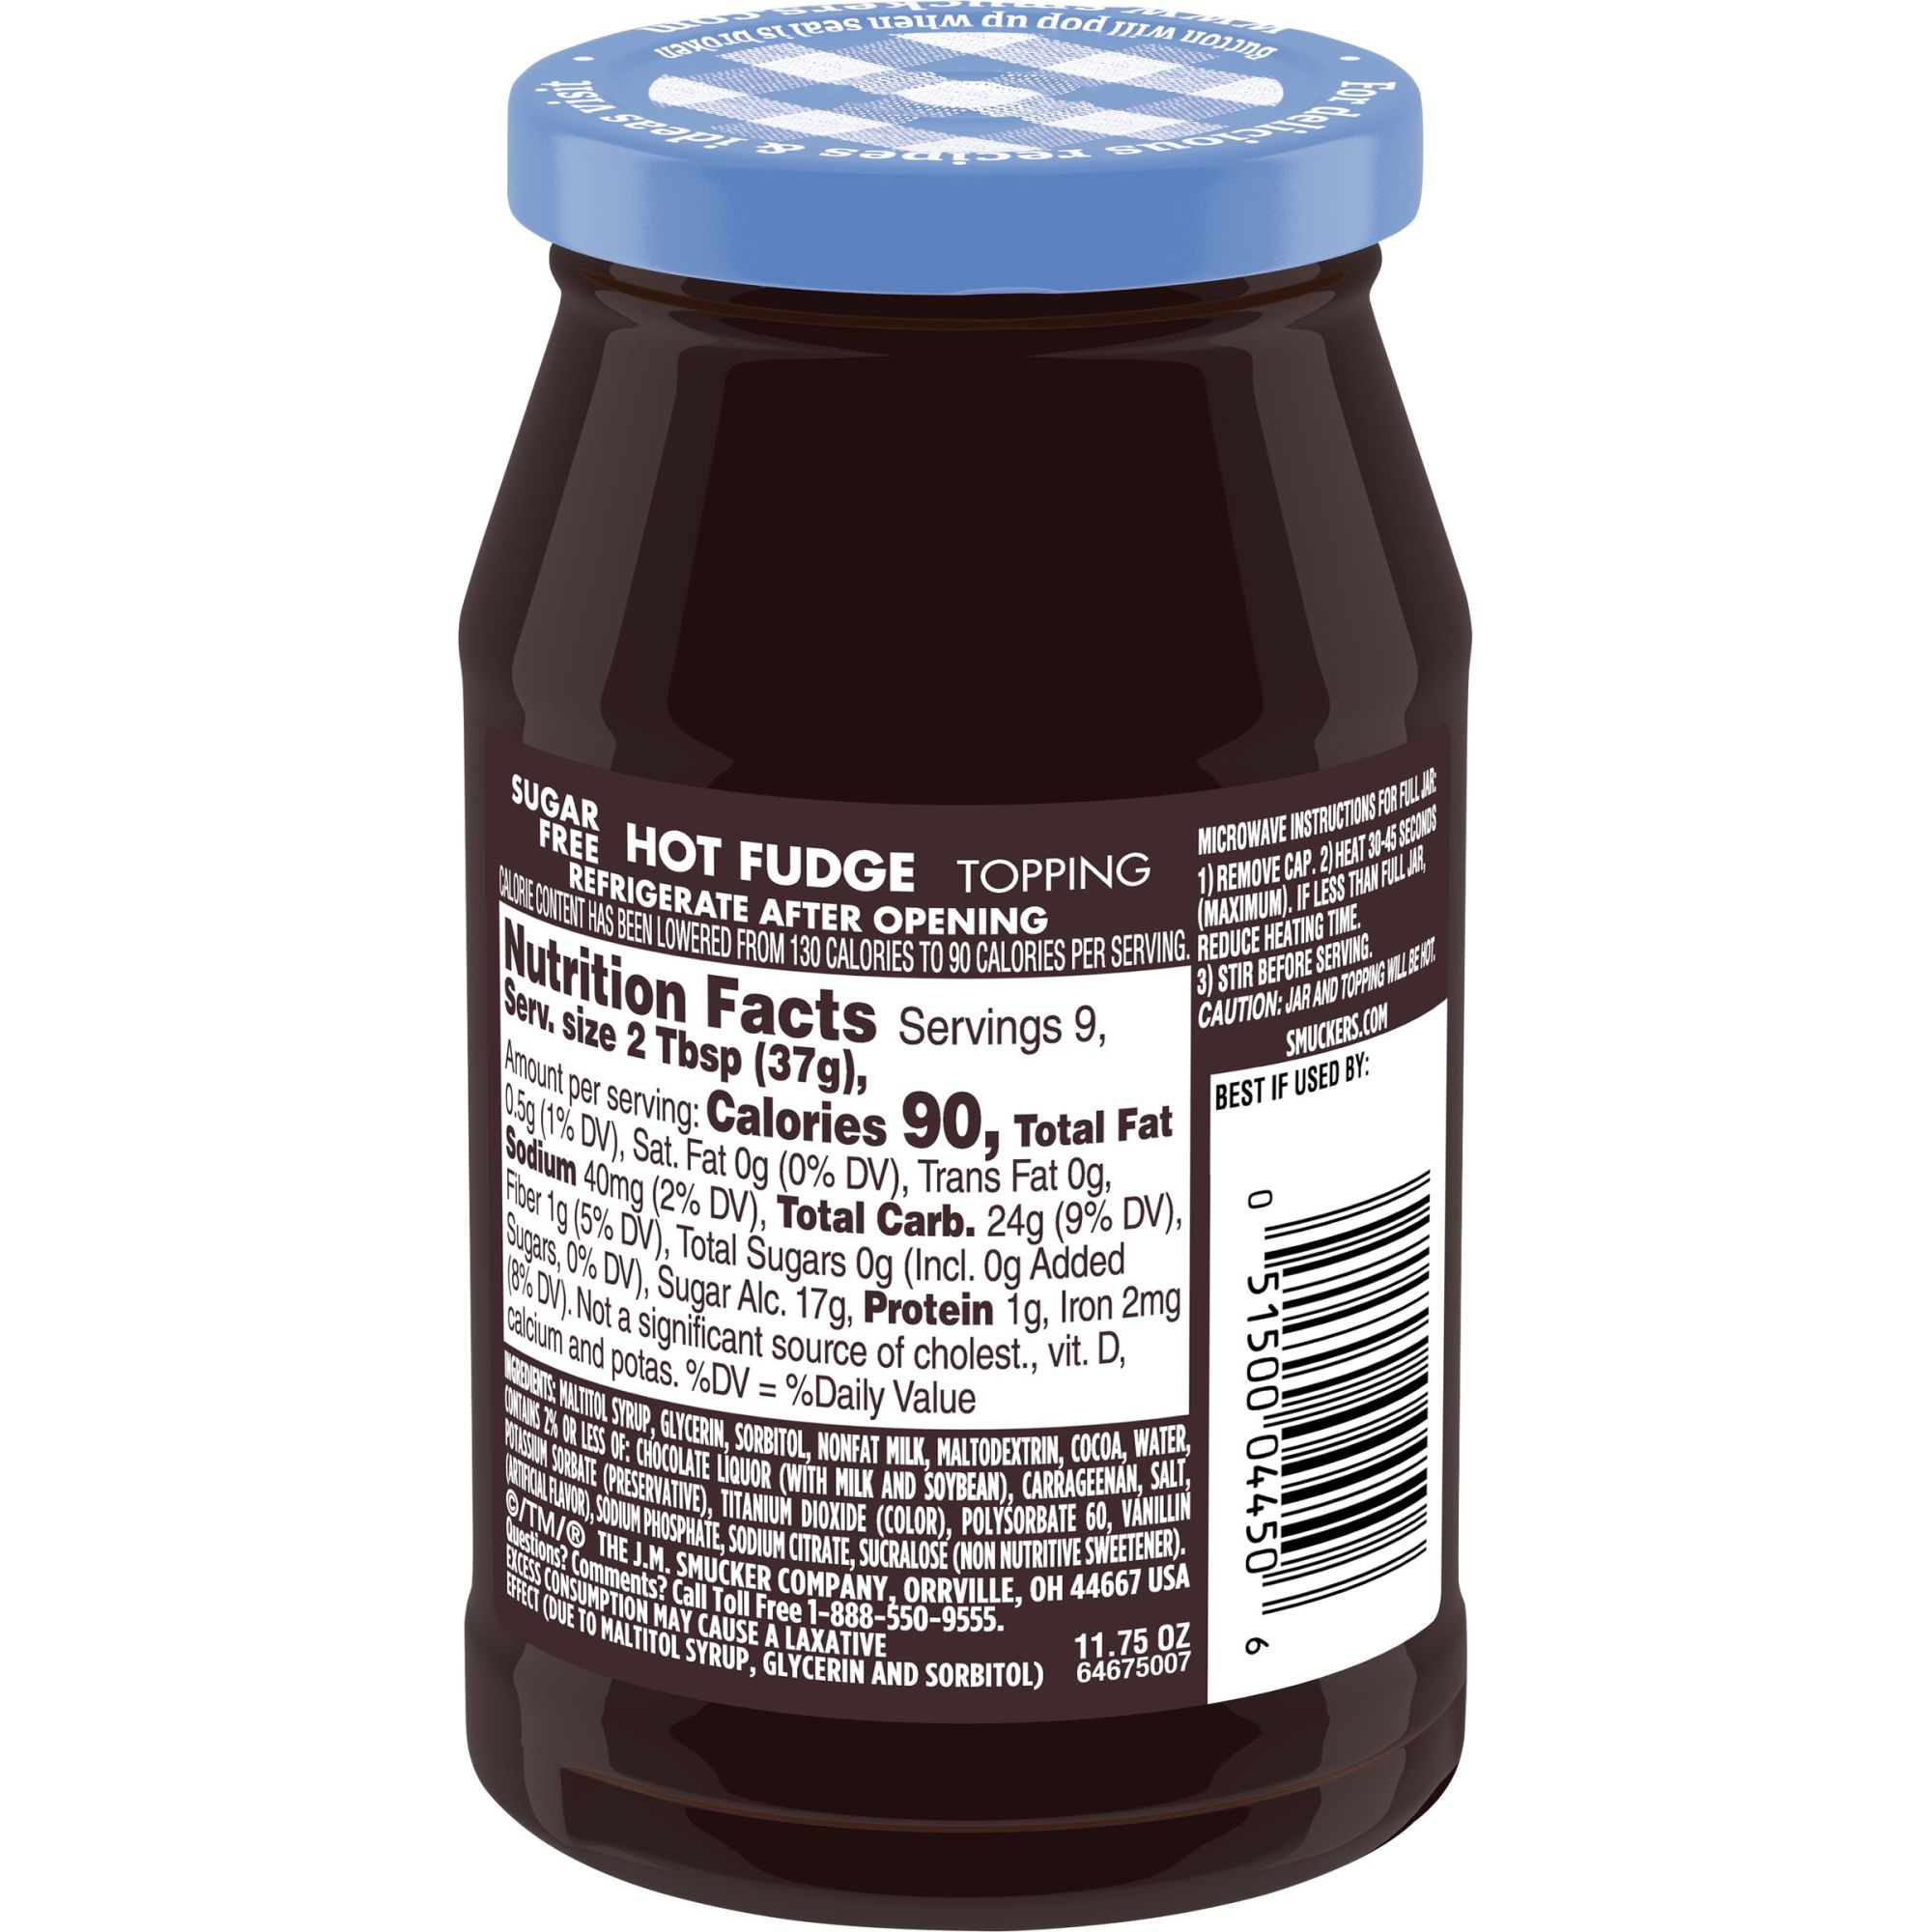 Smucker's Sugar Free Hot Fudge Topping, 11.75 Ounces - image 3 of 6